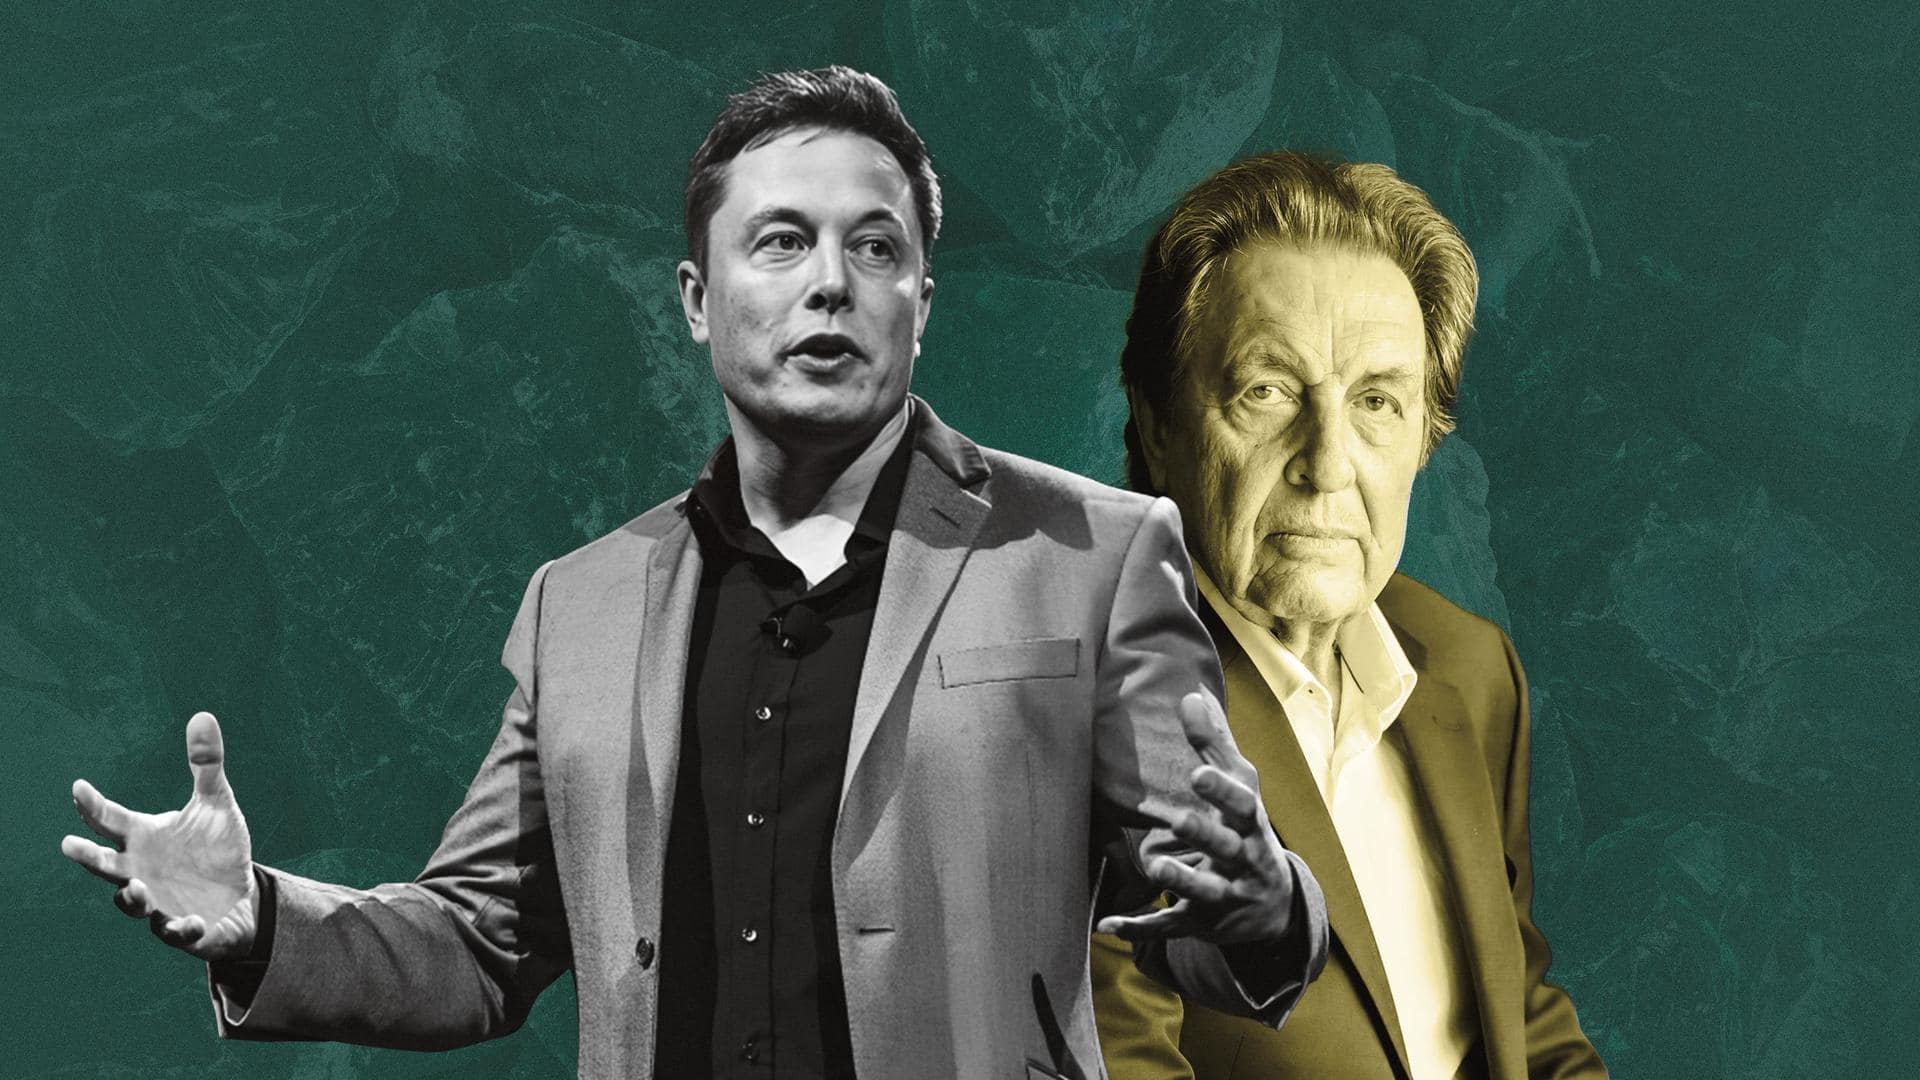 Contrary to Elon Musk's claims, father says emerald mine existed 